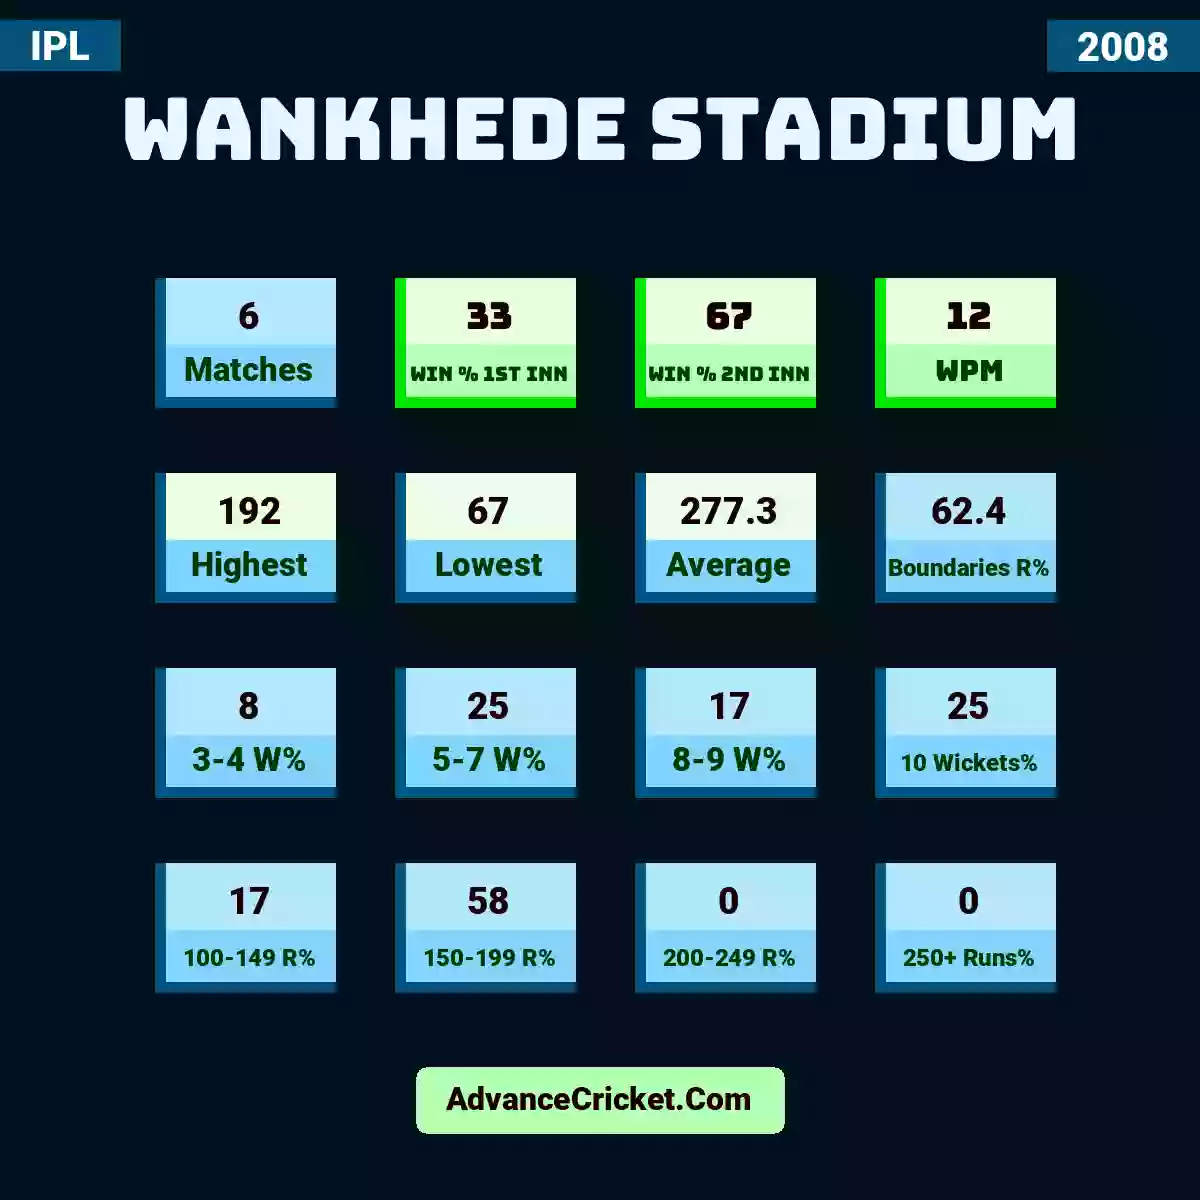 Image showing Wankhede Stadium with Matches: 6, Win % 1st Inn: 33, Win % 2nd Inn: 67, WPM: 12, Highest: 192, Lowest: 67, Average: 277.3, Boundaries R%: 62.4, 3-4 W%: 8, 5-7 W%: 25, 8-9 W%: 17, 10 Wickets%: 25, 100-149 R%: 17, 150-199 R%: 58, 200-249 R%: 0, 250+ Runs%: 0.